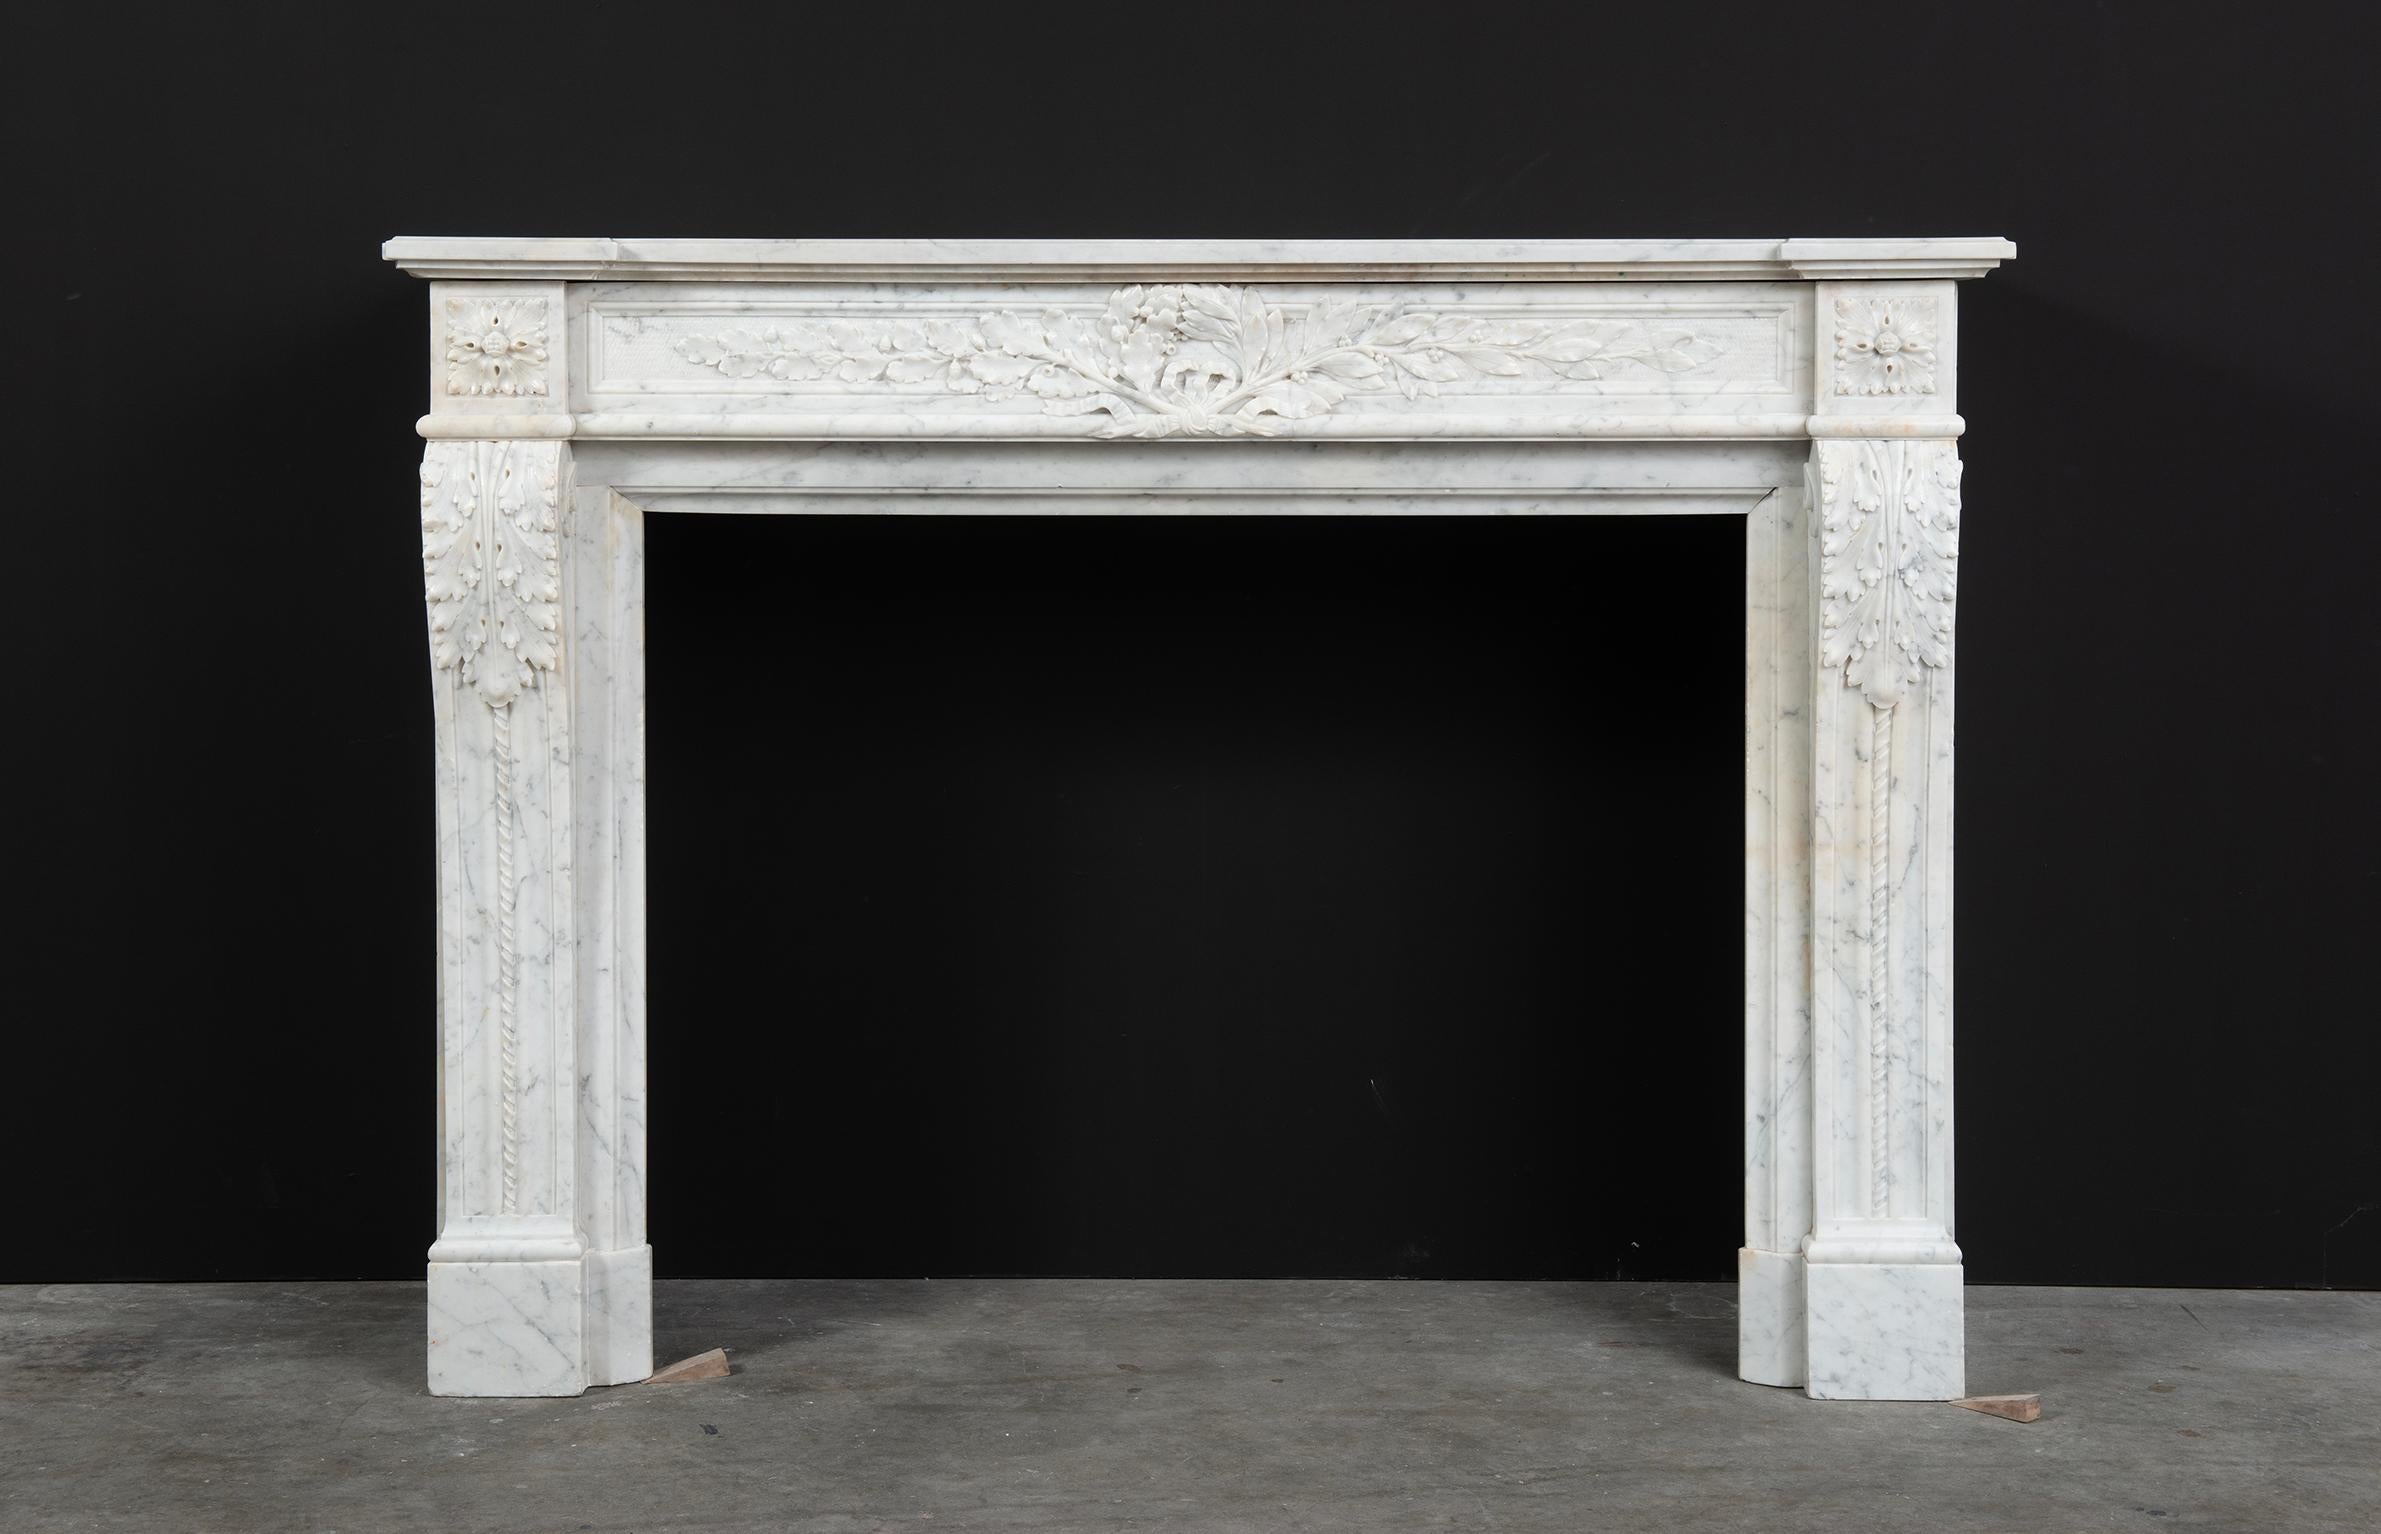 French antique Louis XVI fireplace mantel in white Carrara marble.

Strong and well profiled stepped topshelf above a finely carved paneled frieze with beautiful laurel leaves flanked by floral paterae. The scrolled jambes with paneled sides are